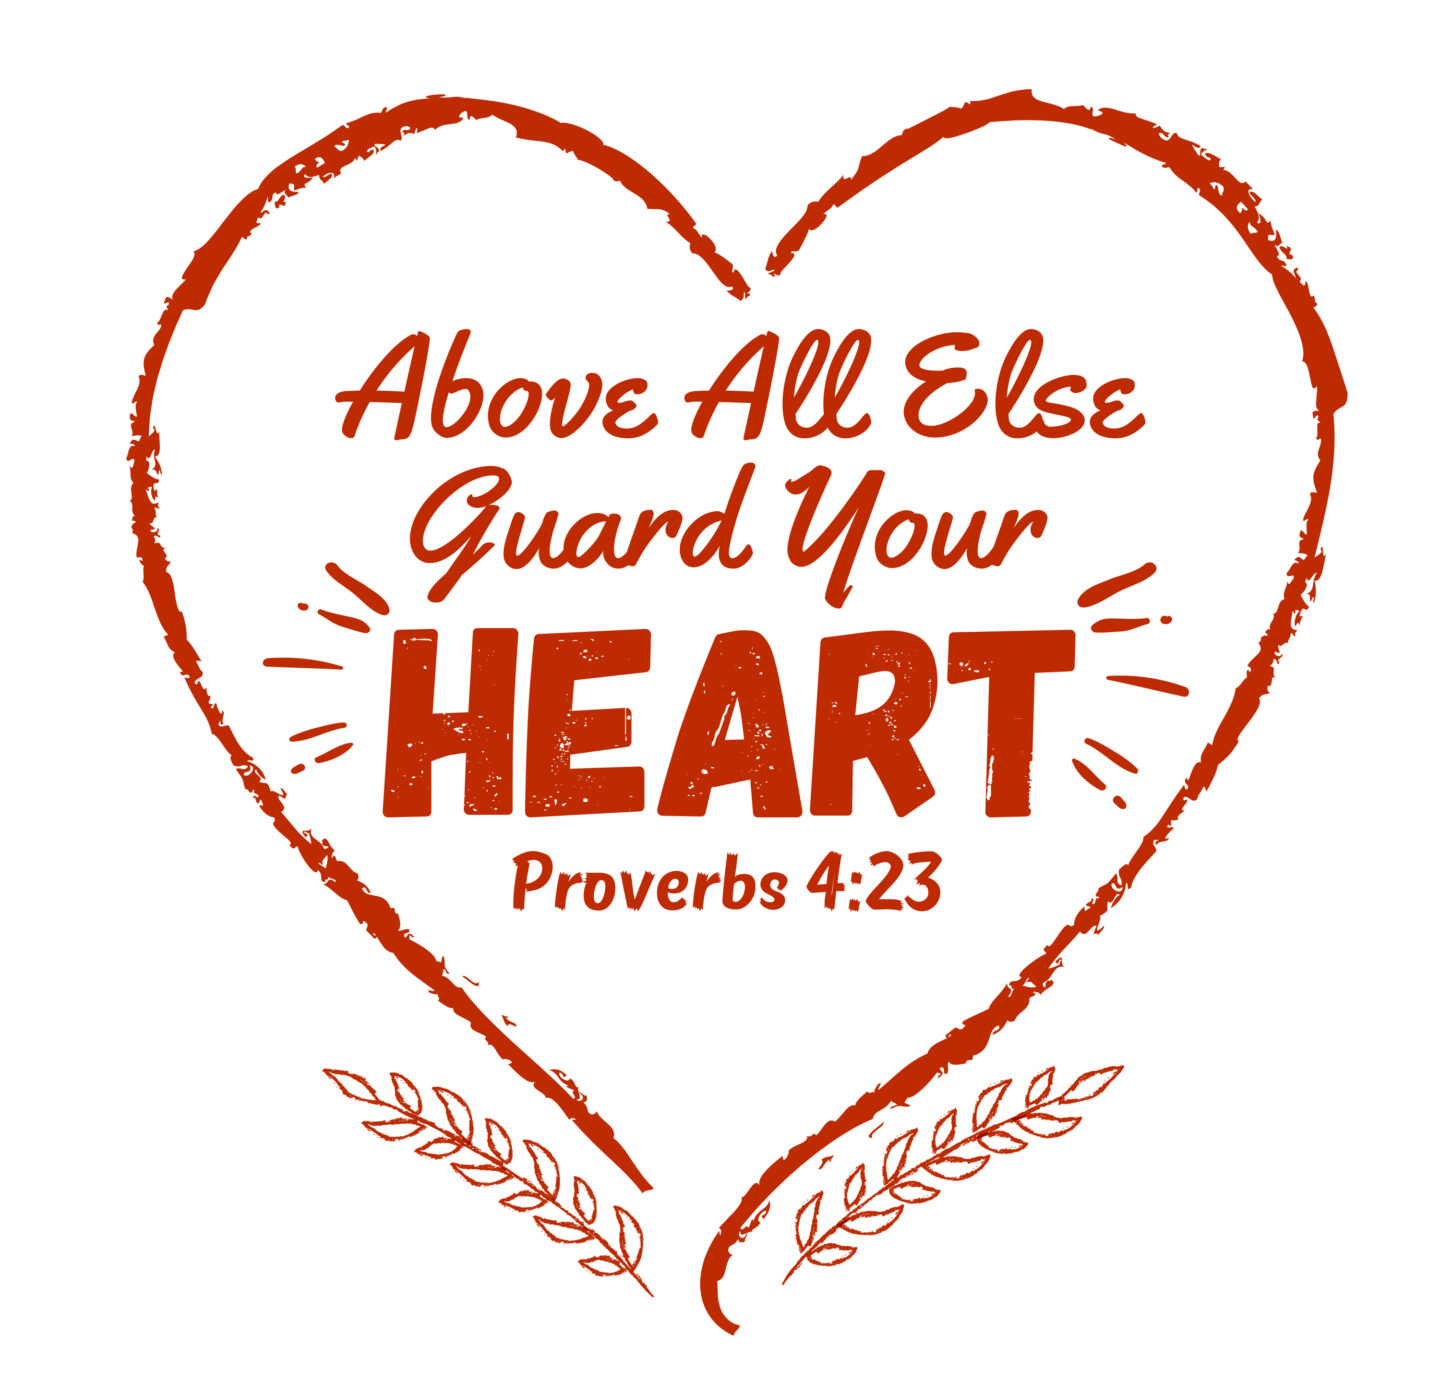 Guarding your heart